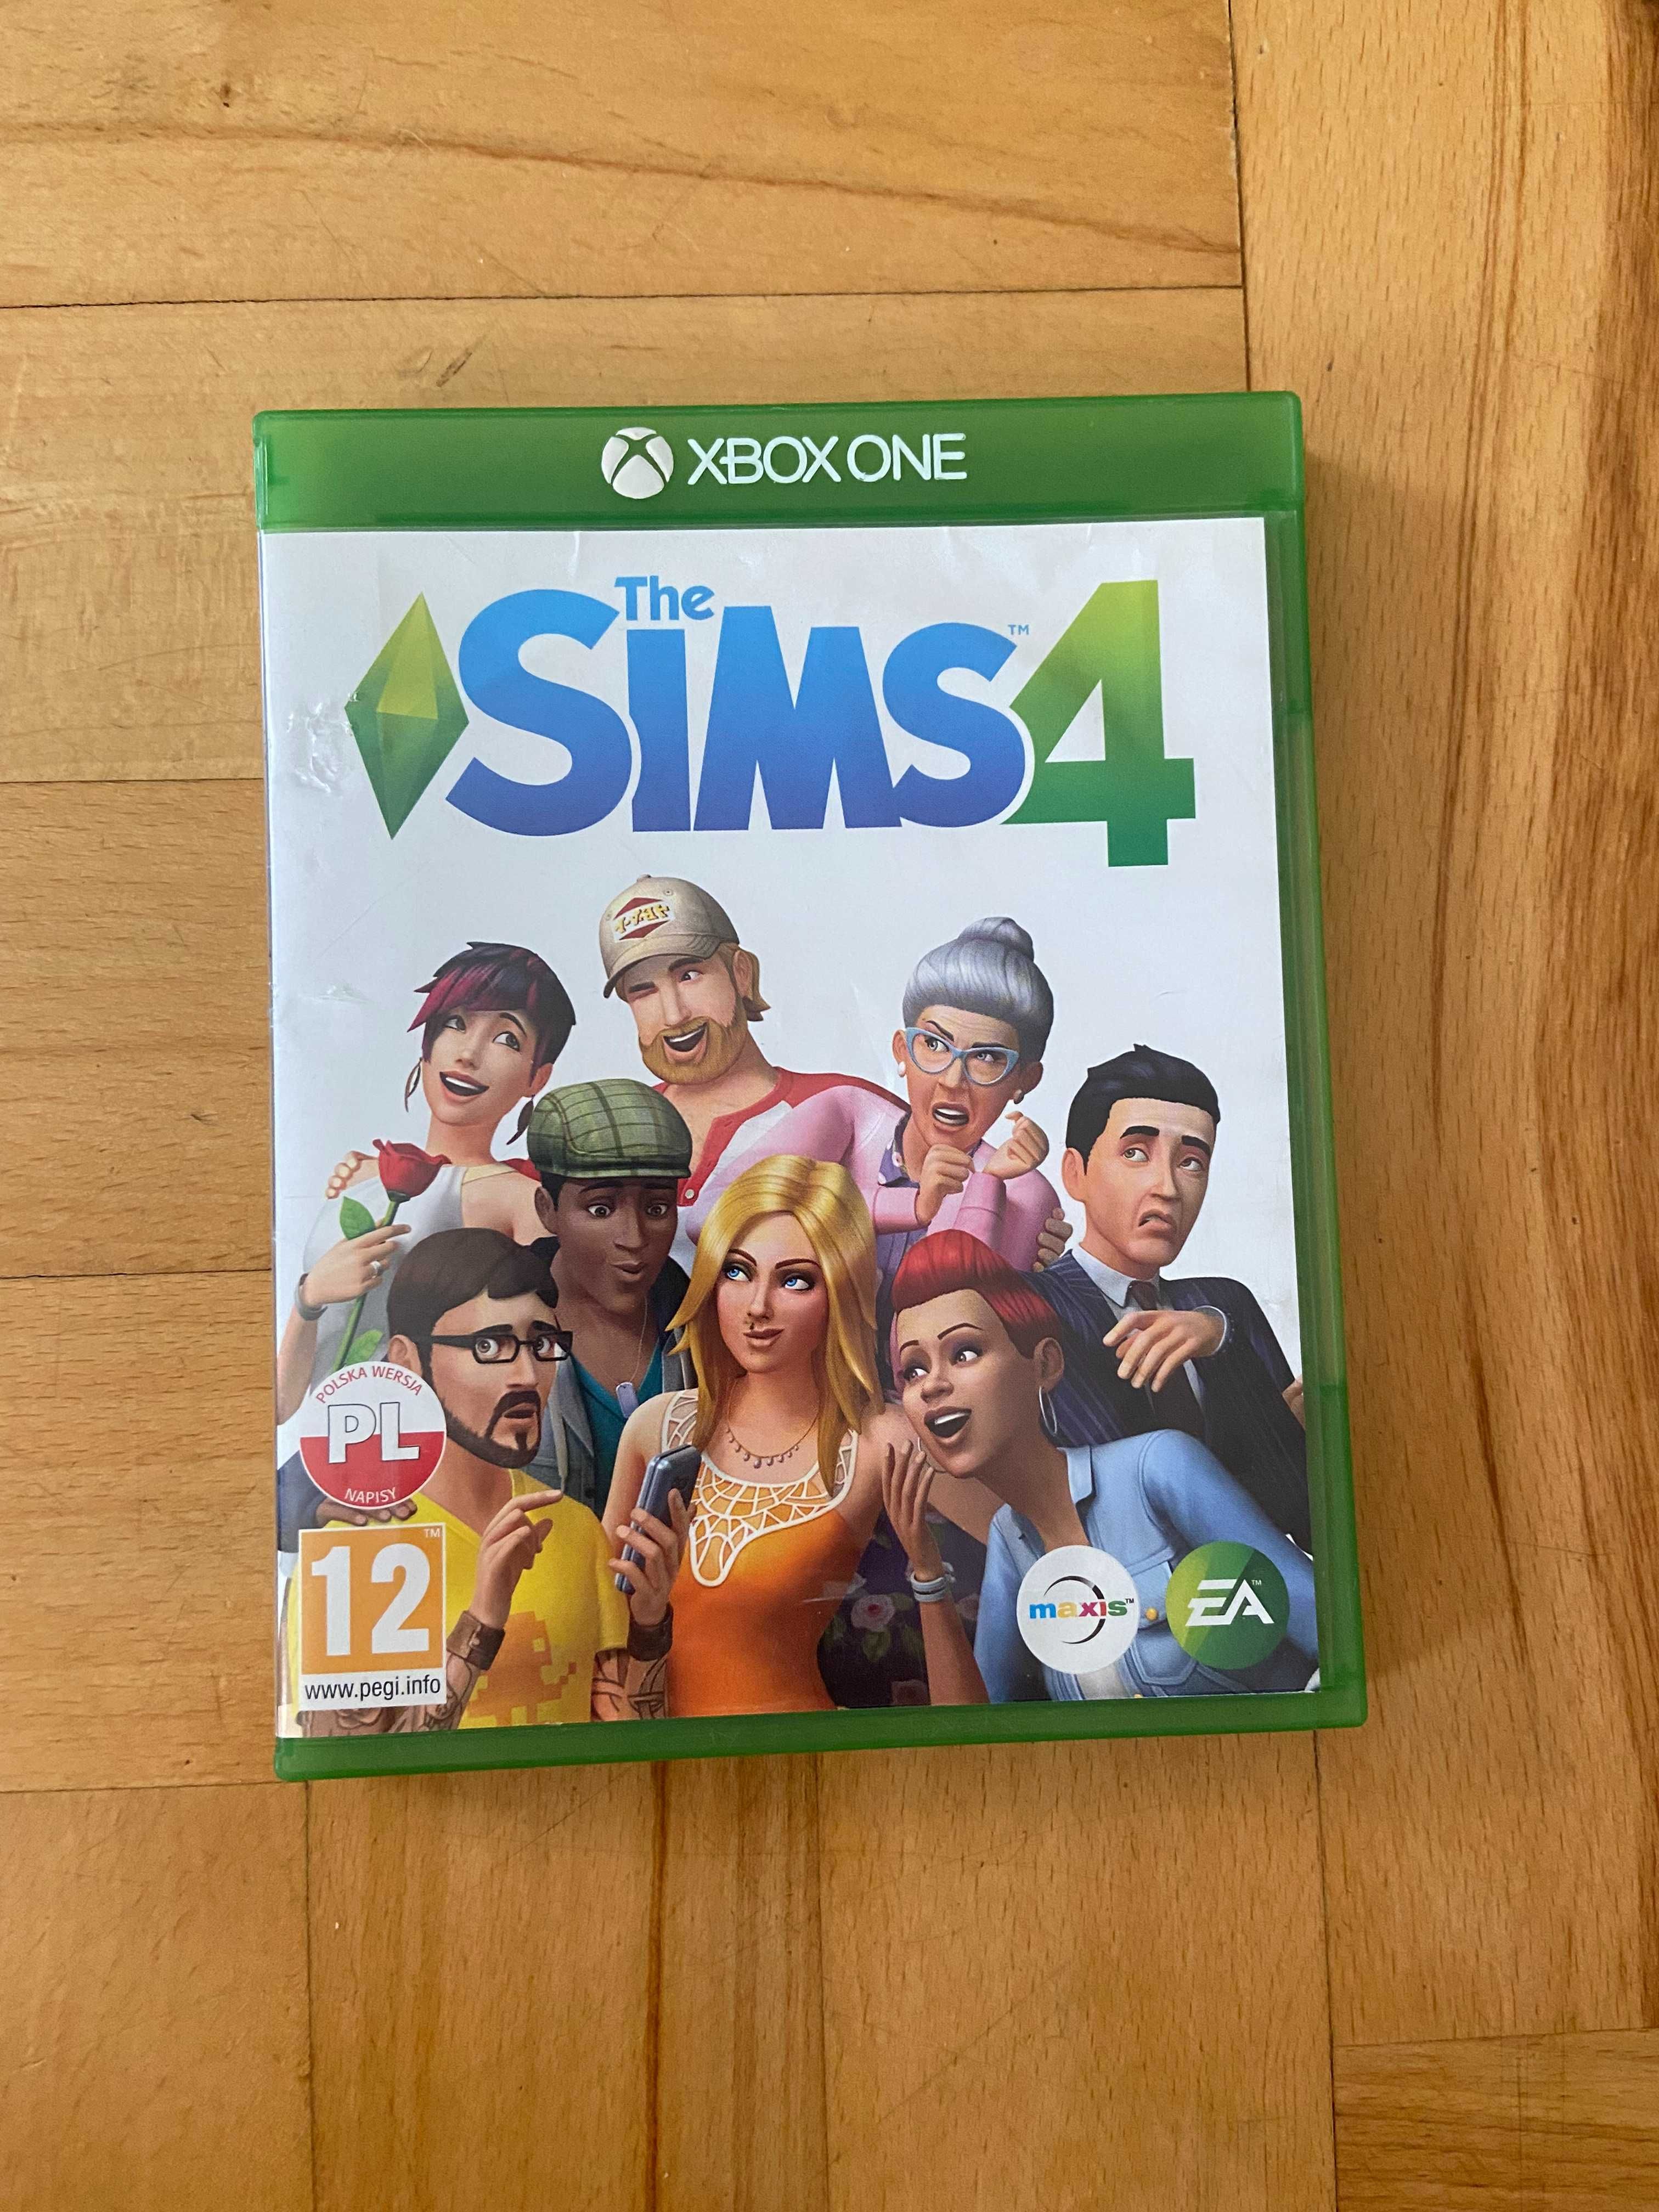 The sims 4 Xbox One